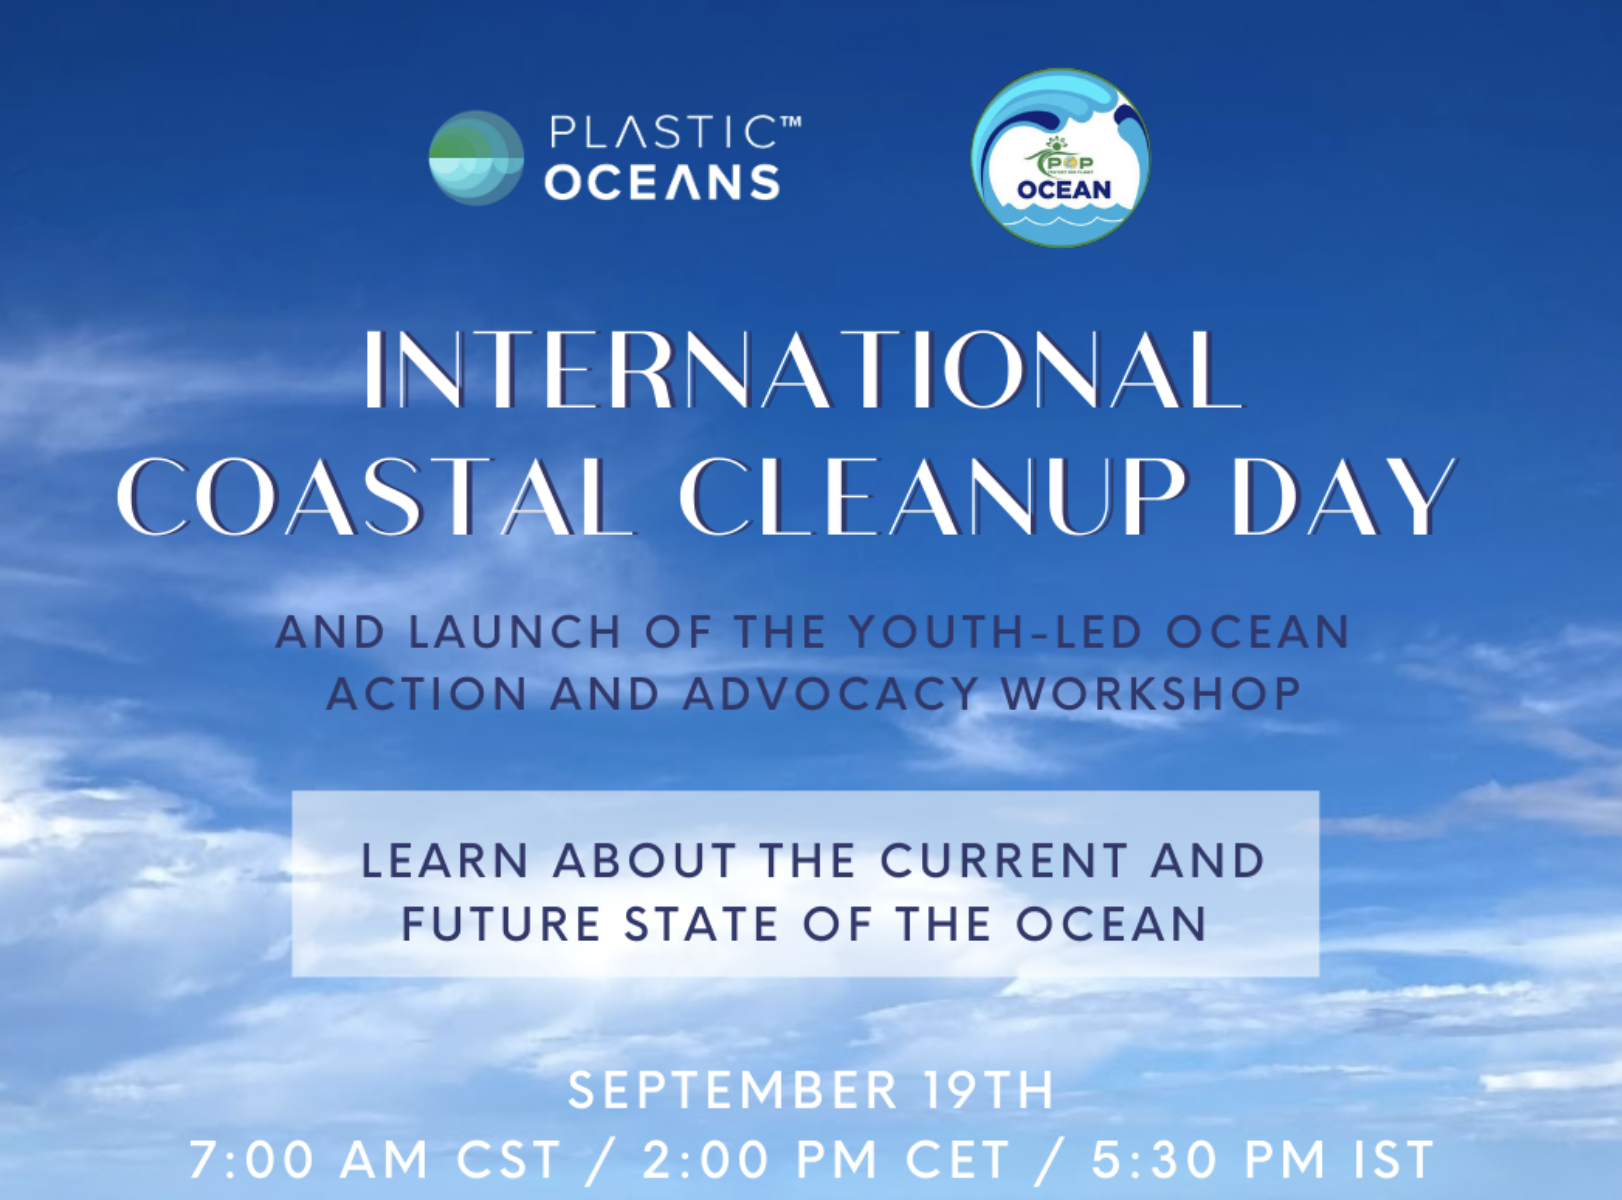 International Coastal Cleanup Day and The Launch of the Youth-Led Ocean Action and Advocacy Workshop